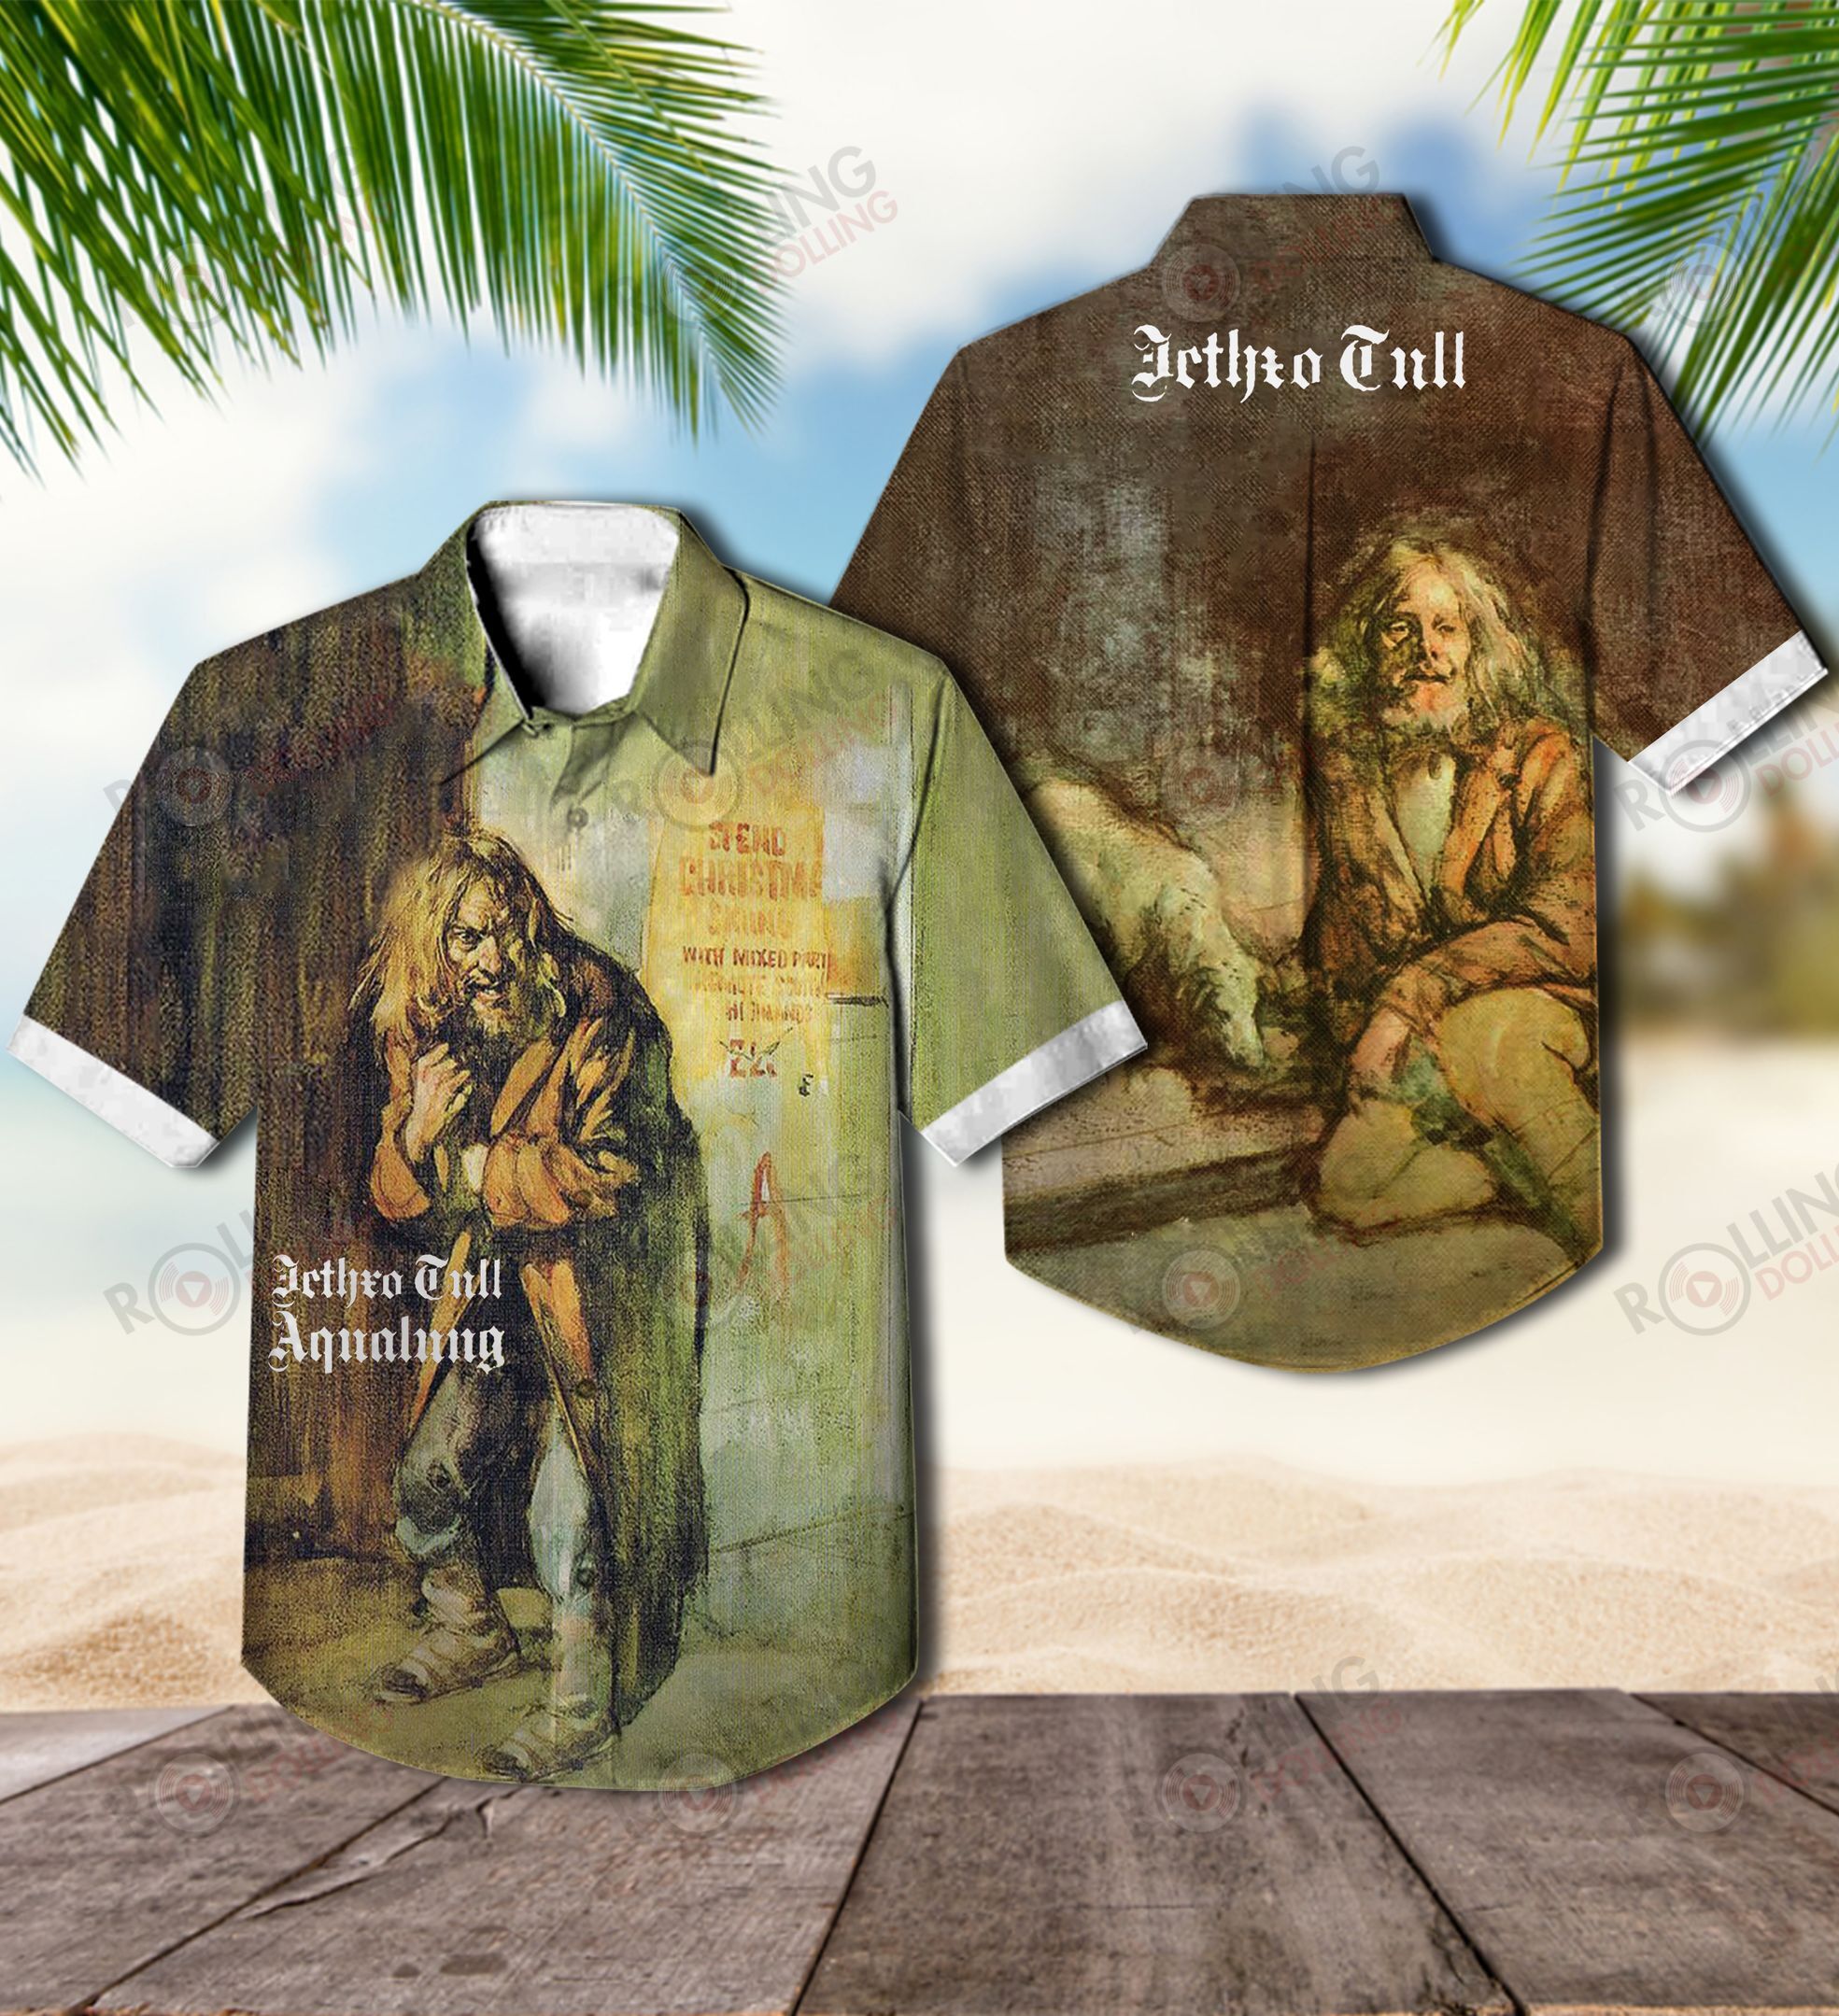 The Hawaiian Shirt is a popular shirt that is worn by Rock band fans 82